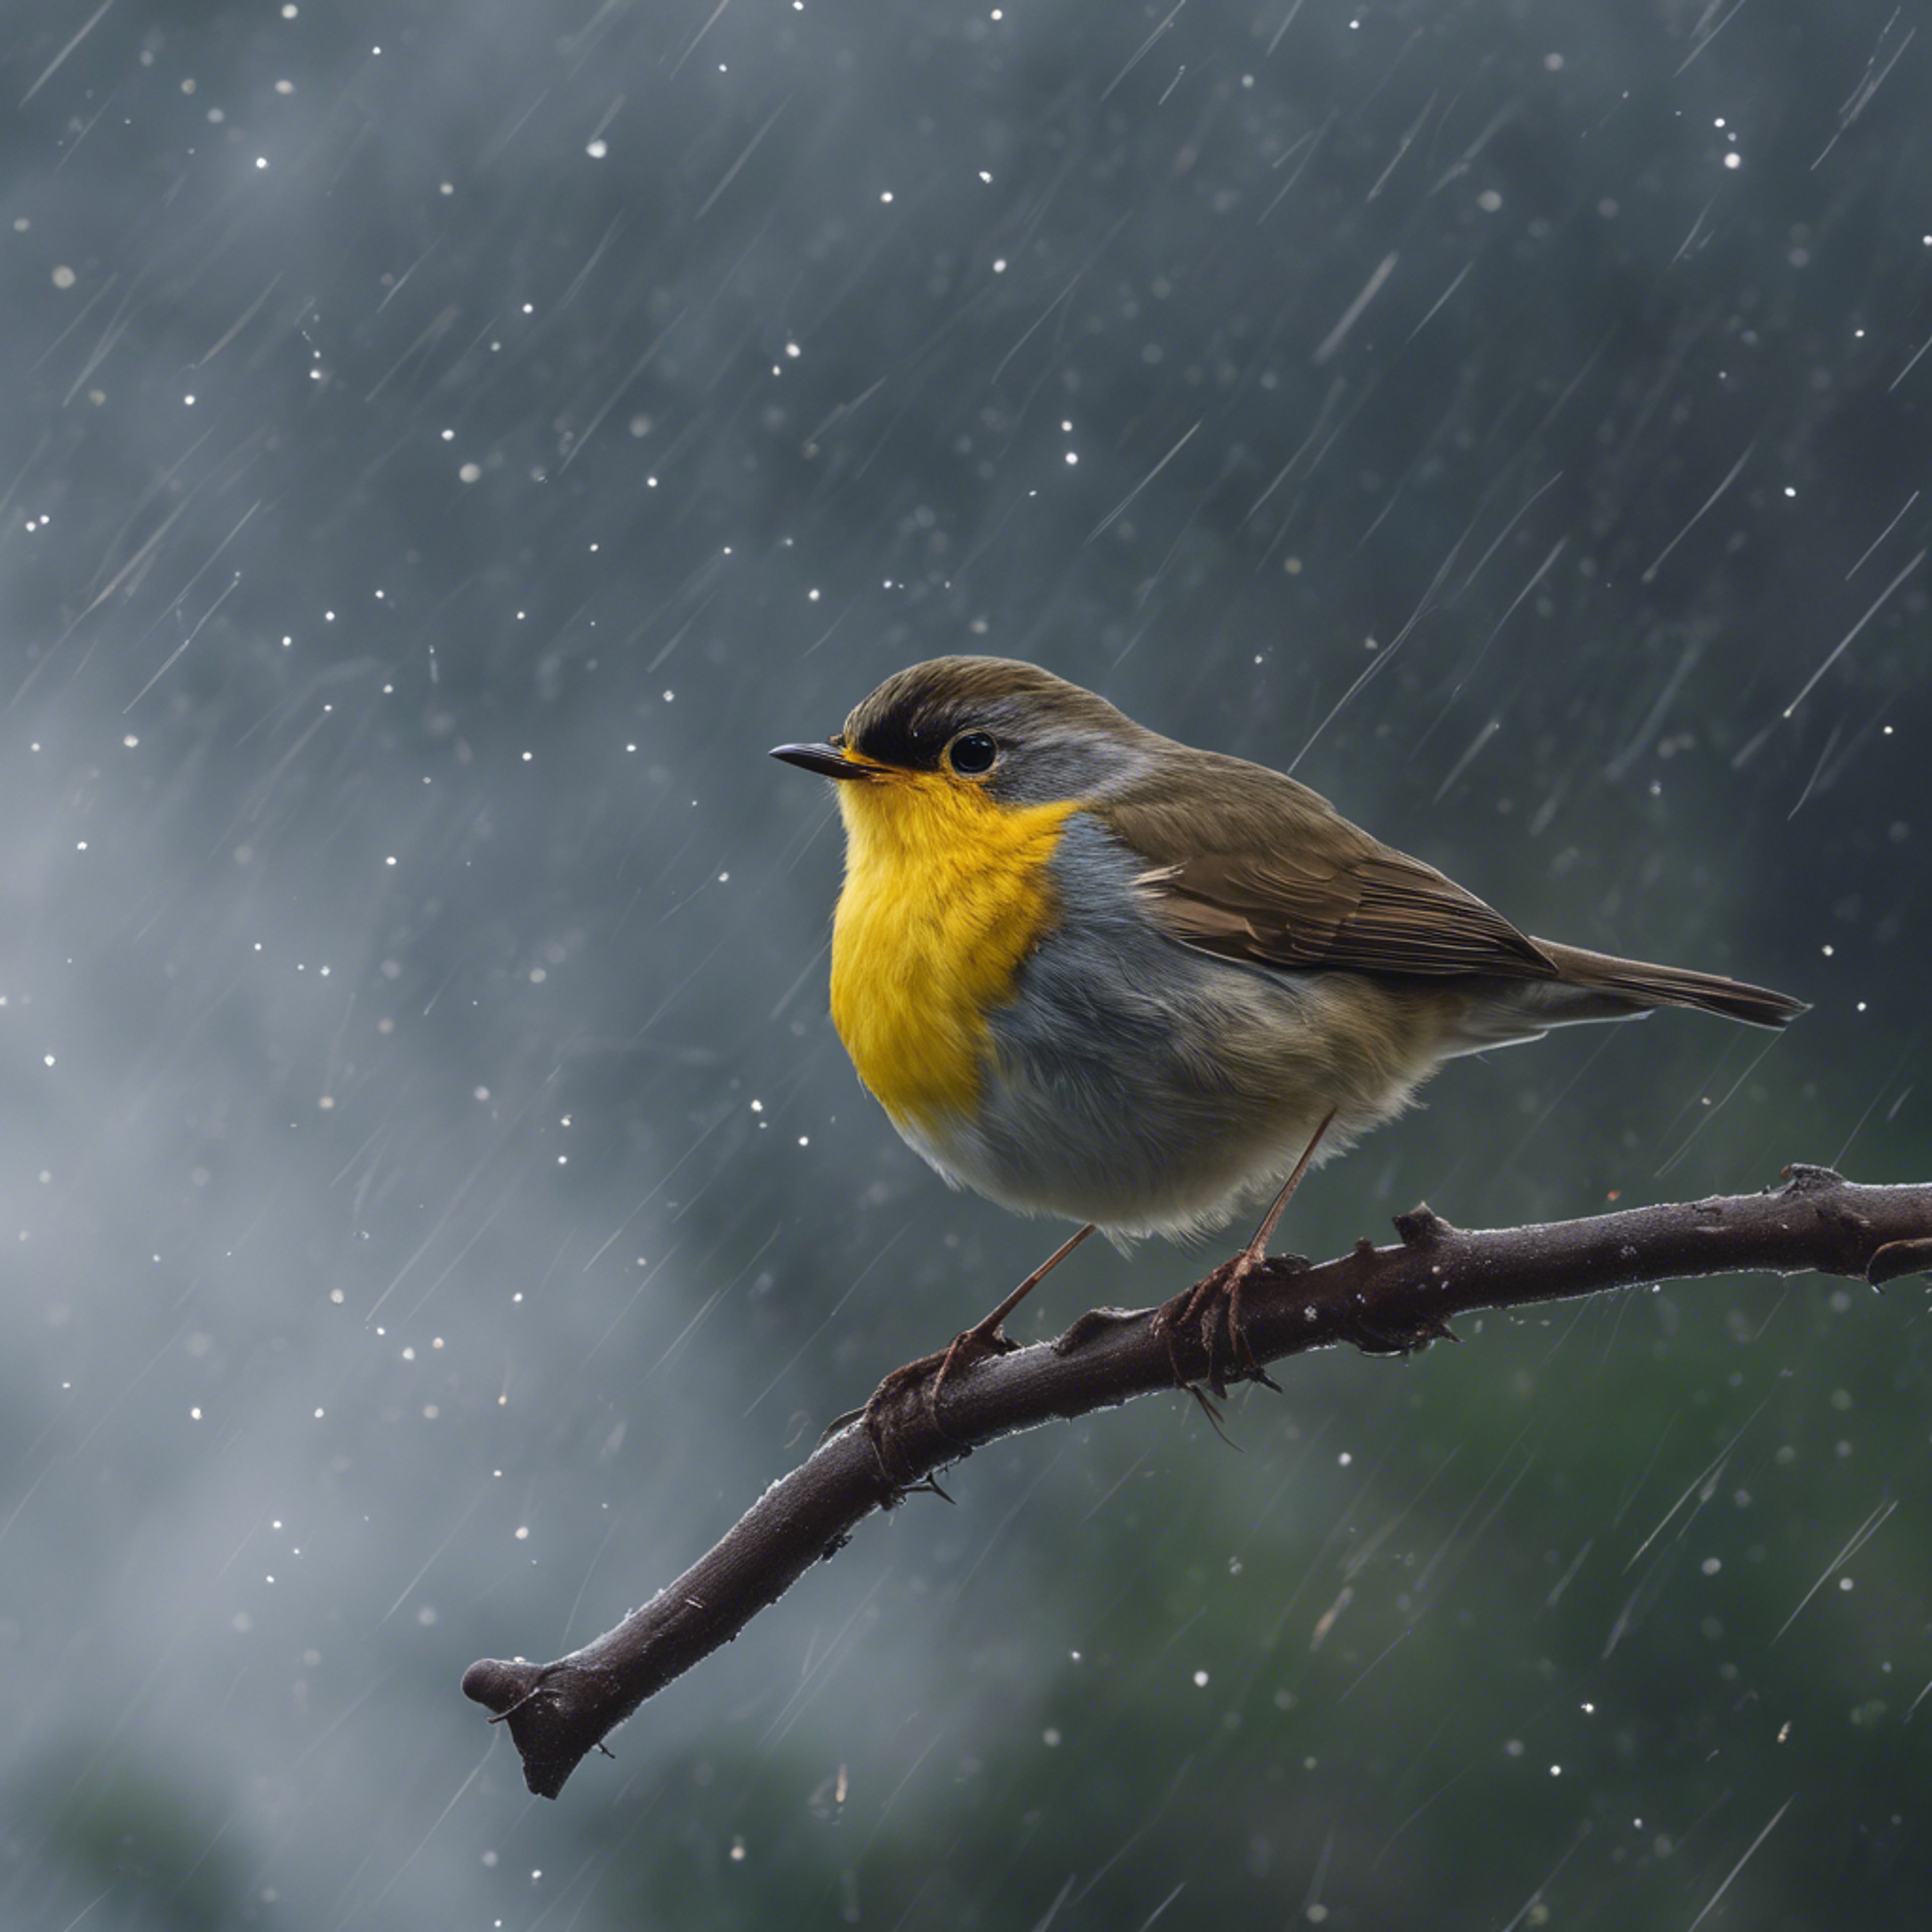 A yellow-breasted robin in mid-flight against a dark, stormy sky. Tapetai[14716aee78274faeac04]